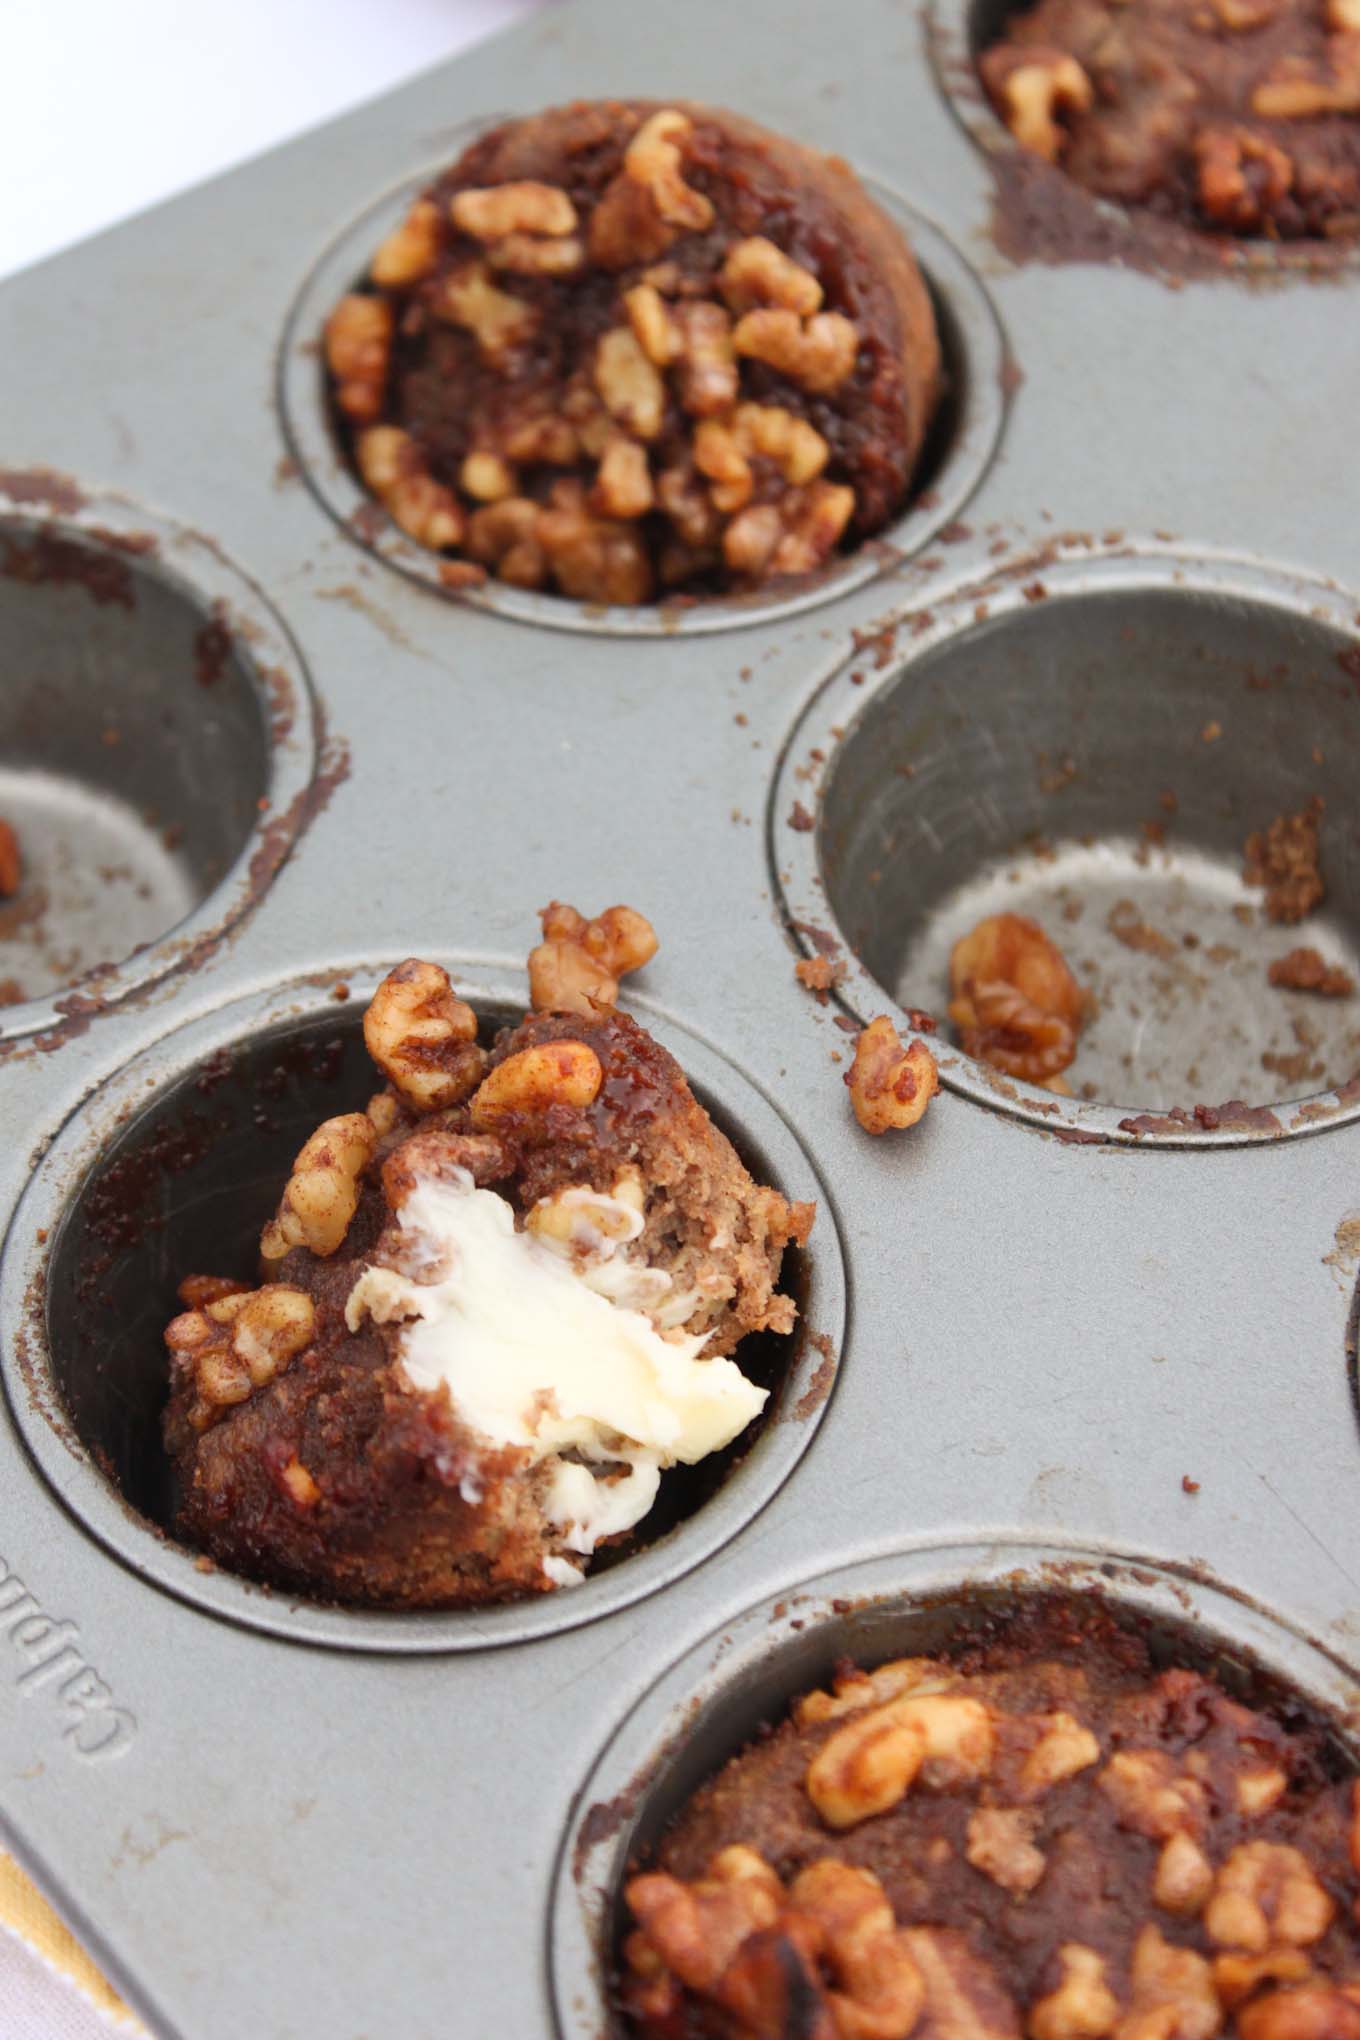 Spiced Zucchini Muffins with Streusel Topping | simplerootswellness.com